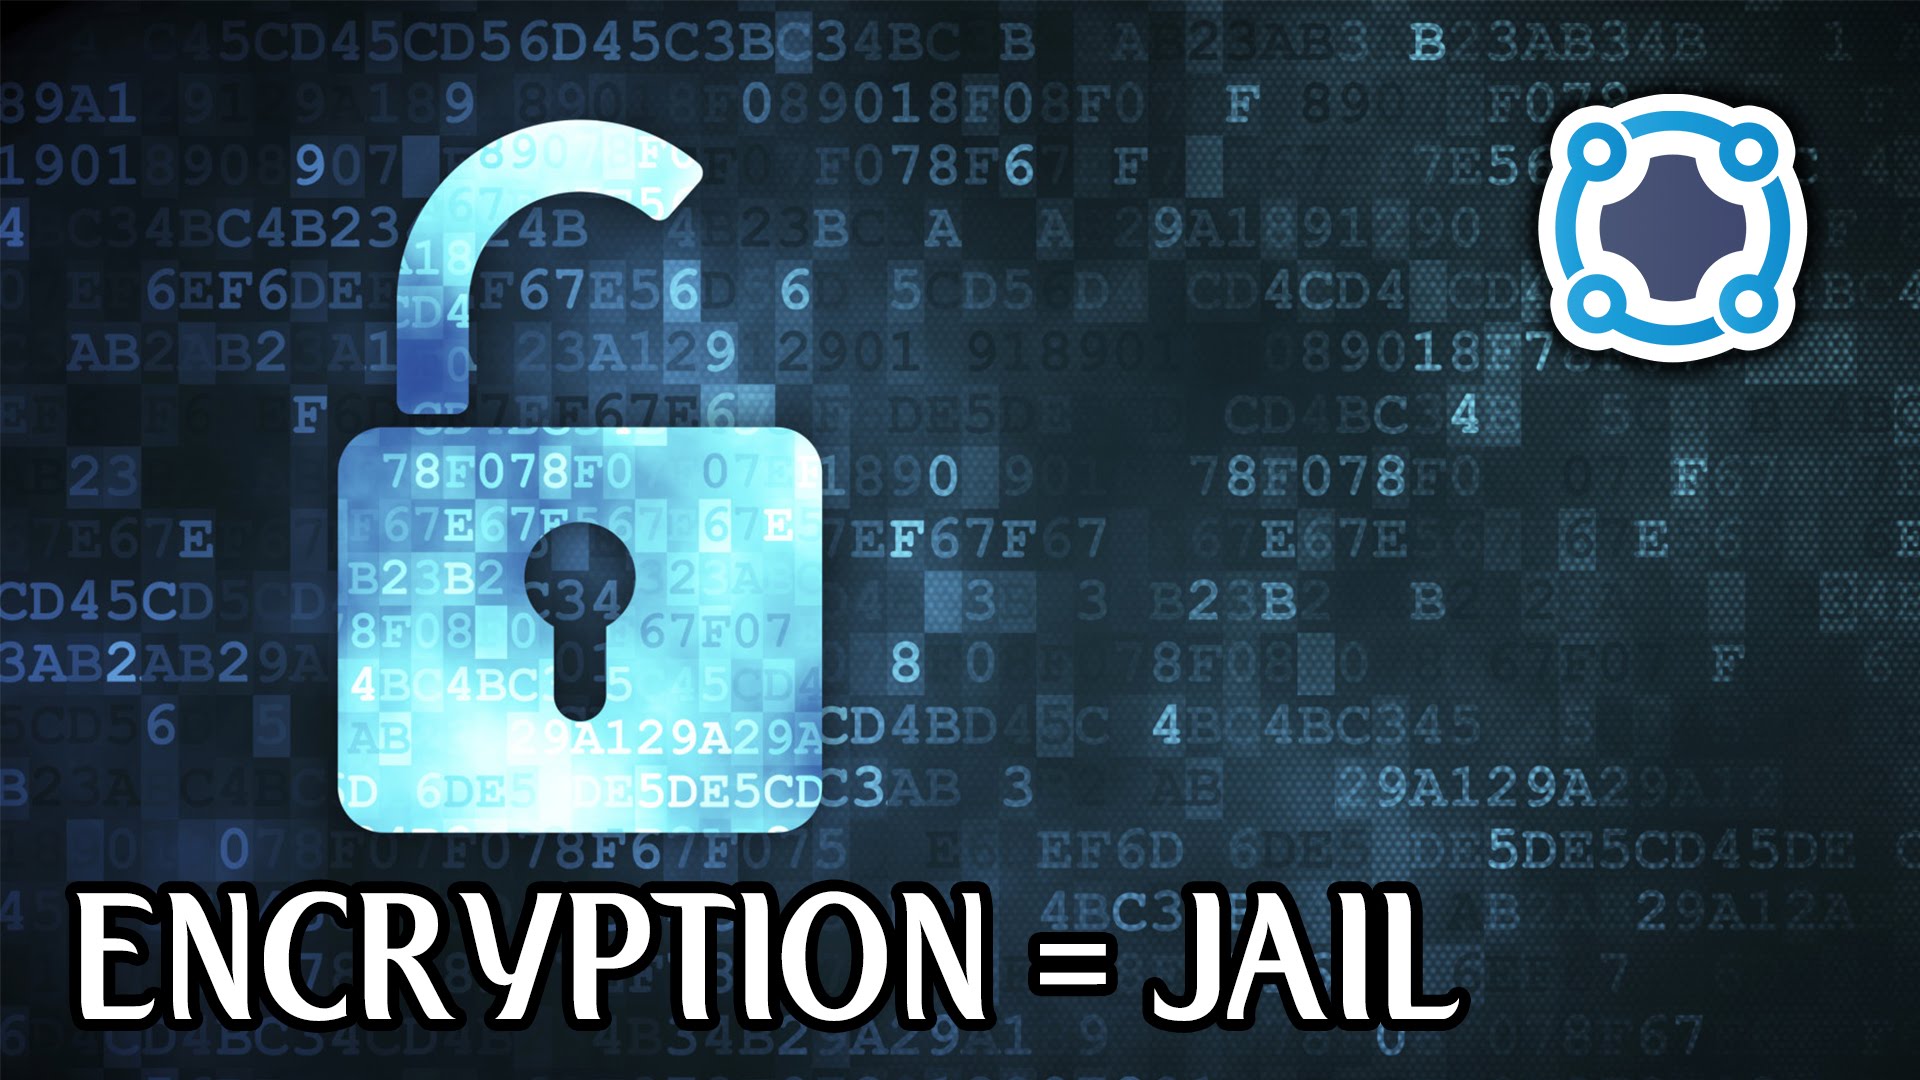 Encrypting Your Hard Drive Could Land You In Jail